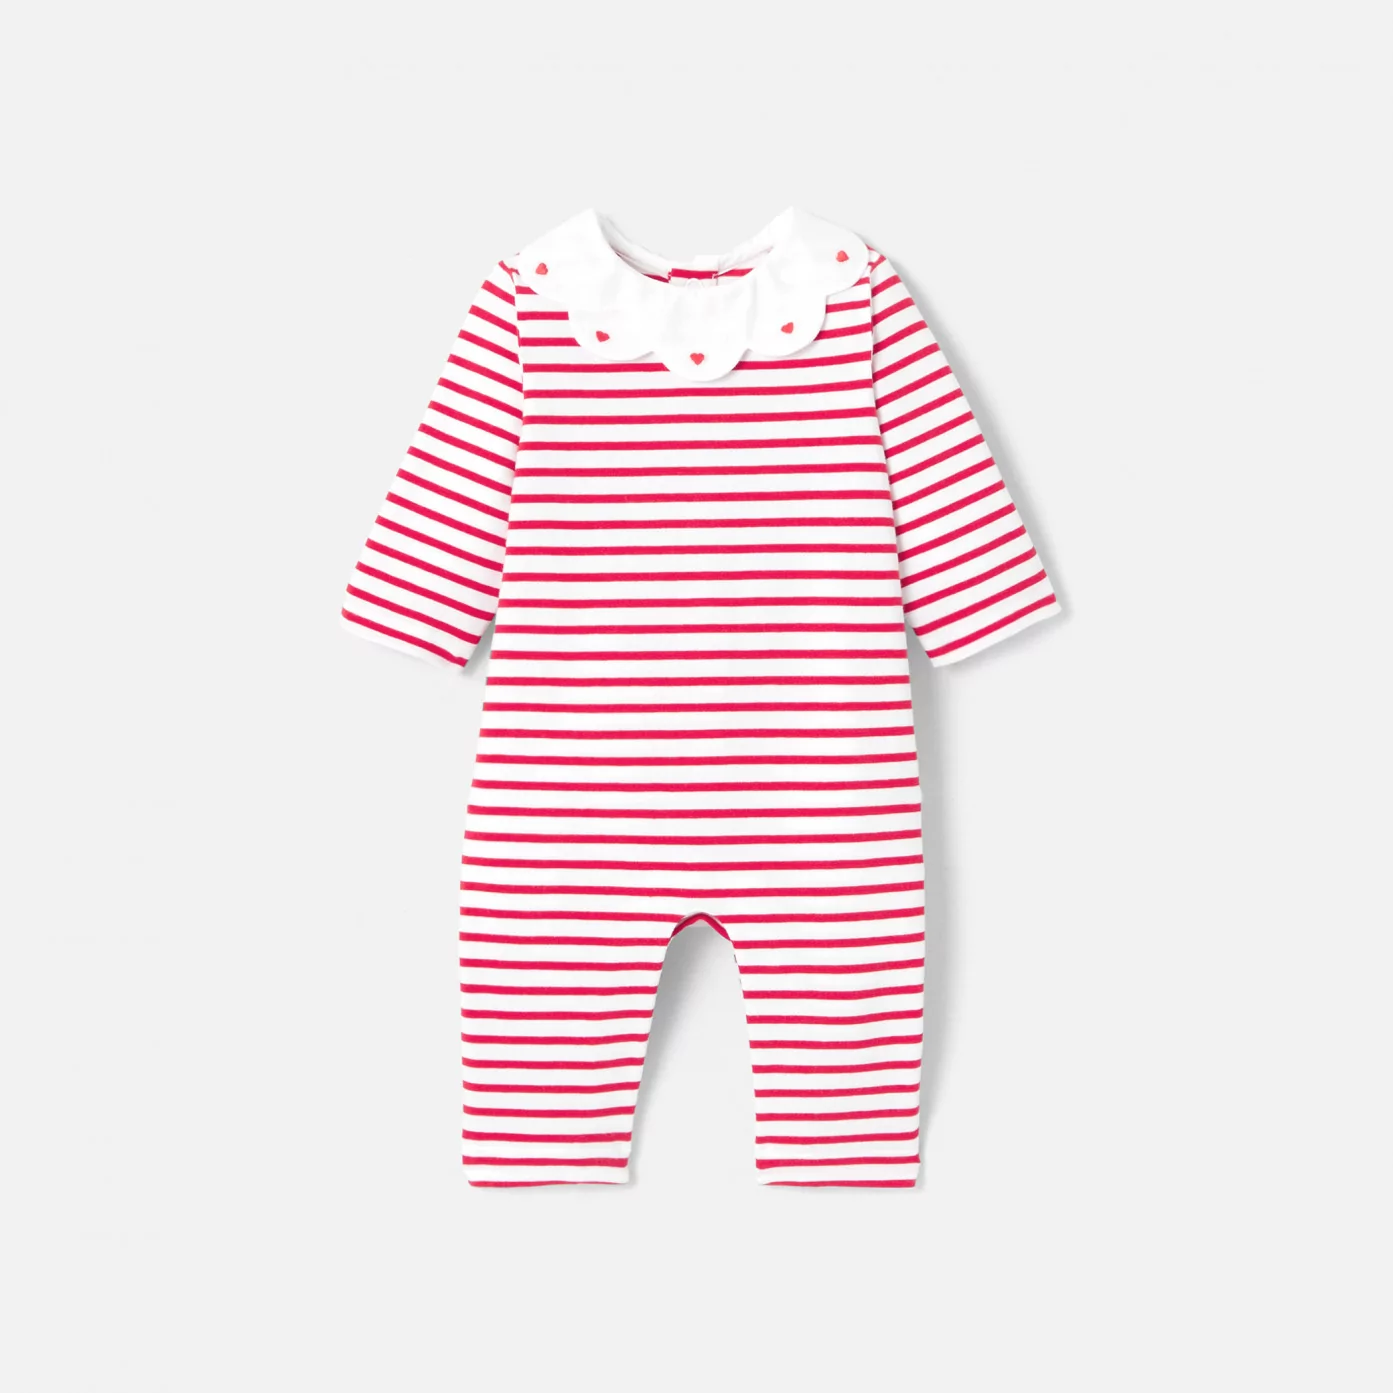 Baby girl jumpsuit in striped jersey